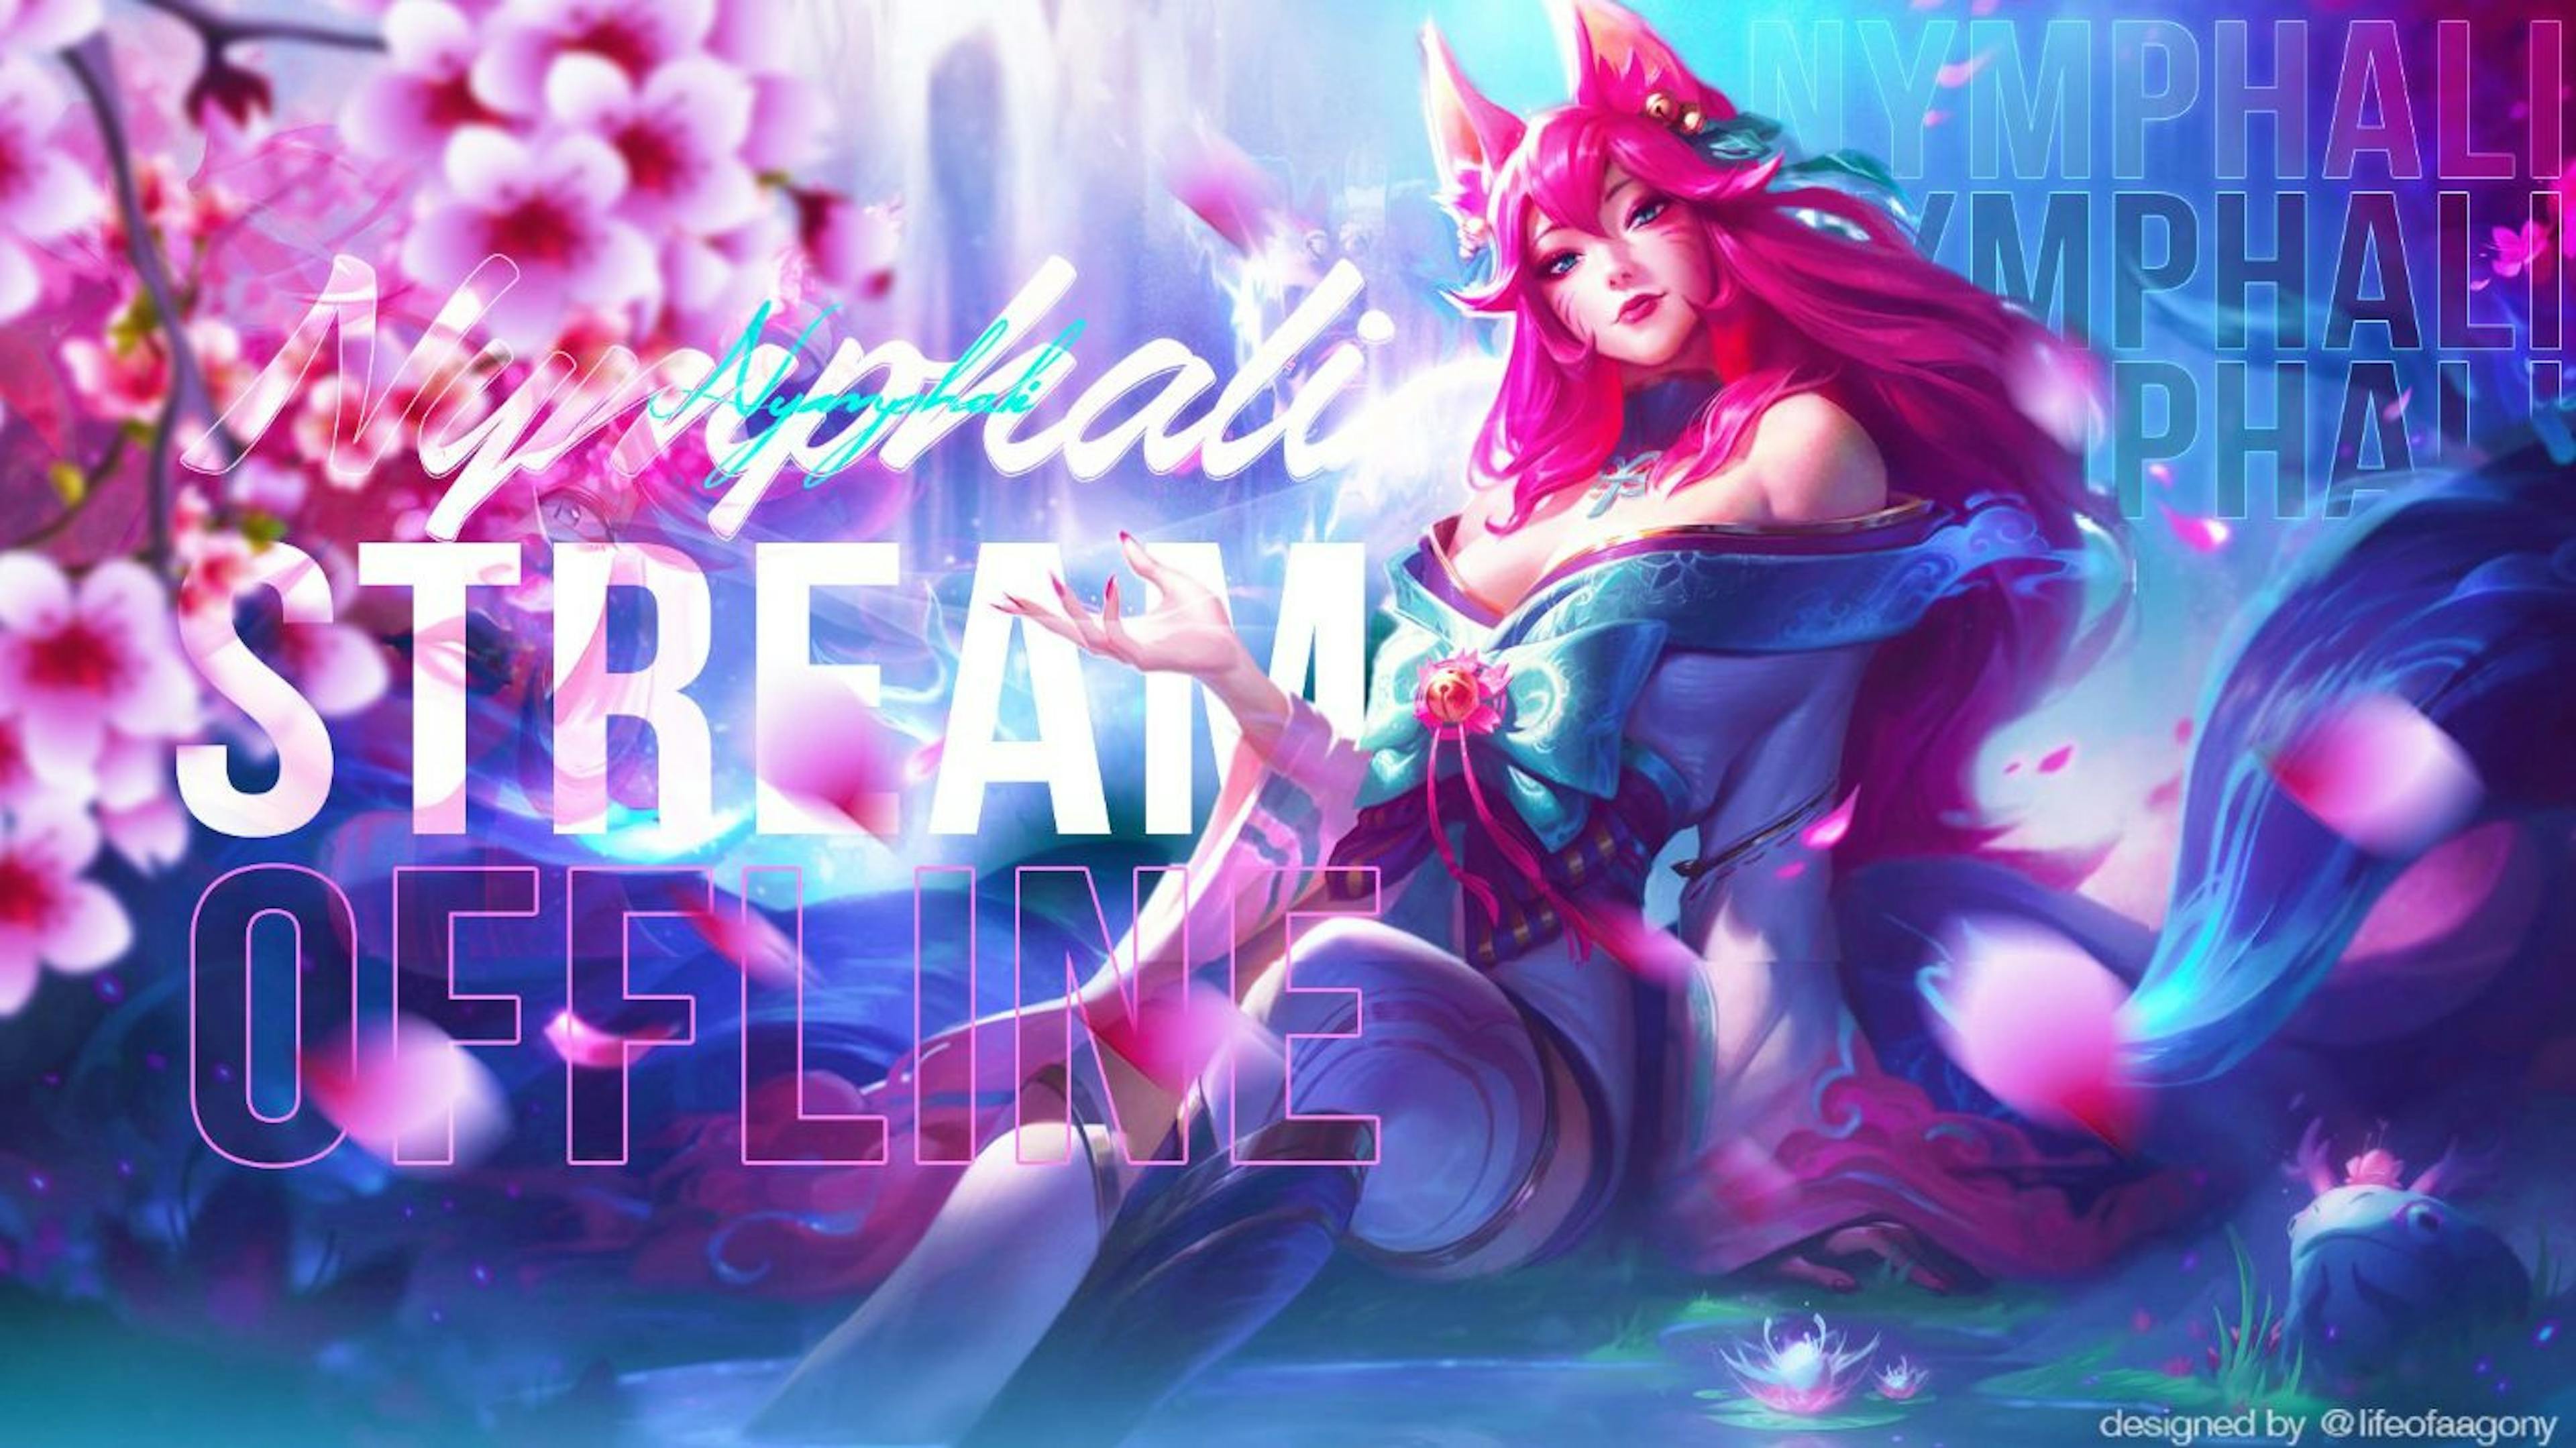 Spirit Blossom Ahri from League of Legends. Image source: Loan MERLIN on Behance.